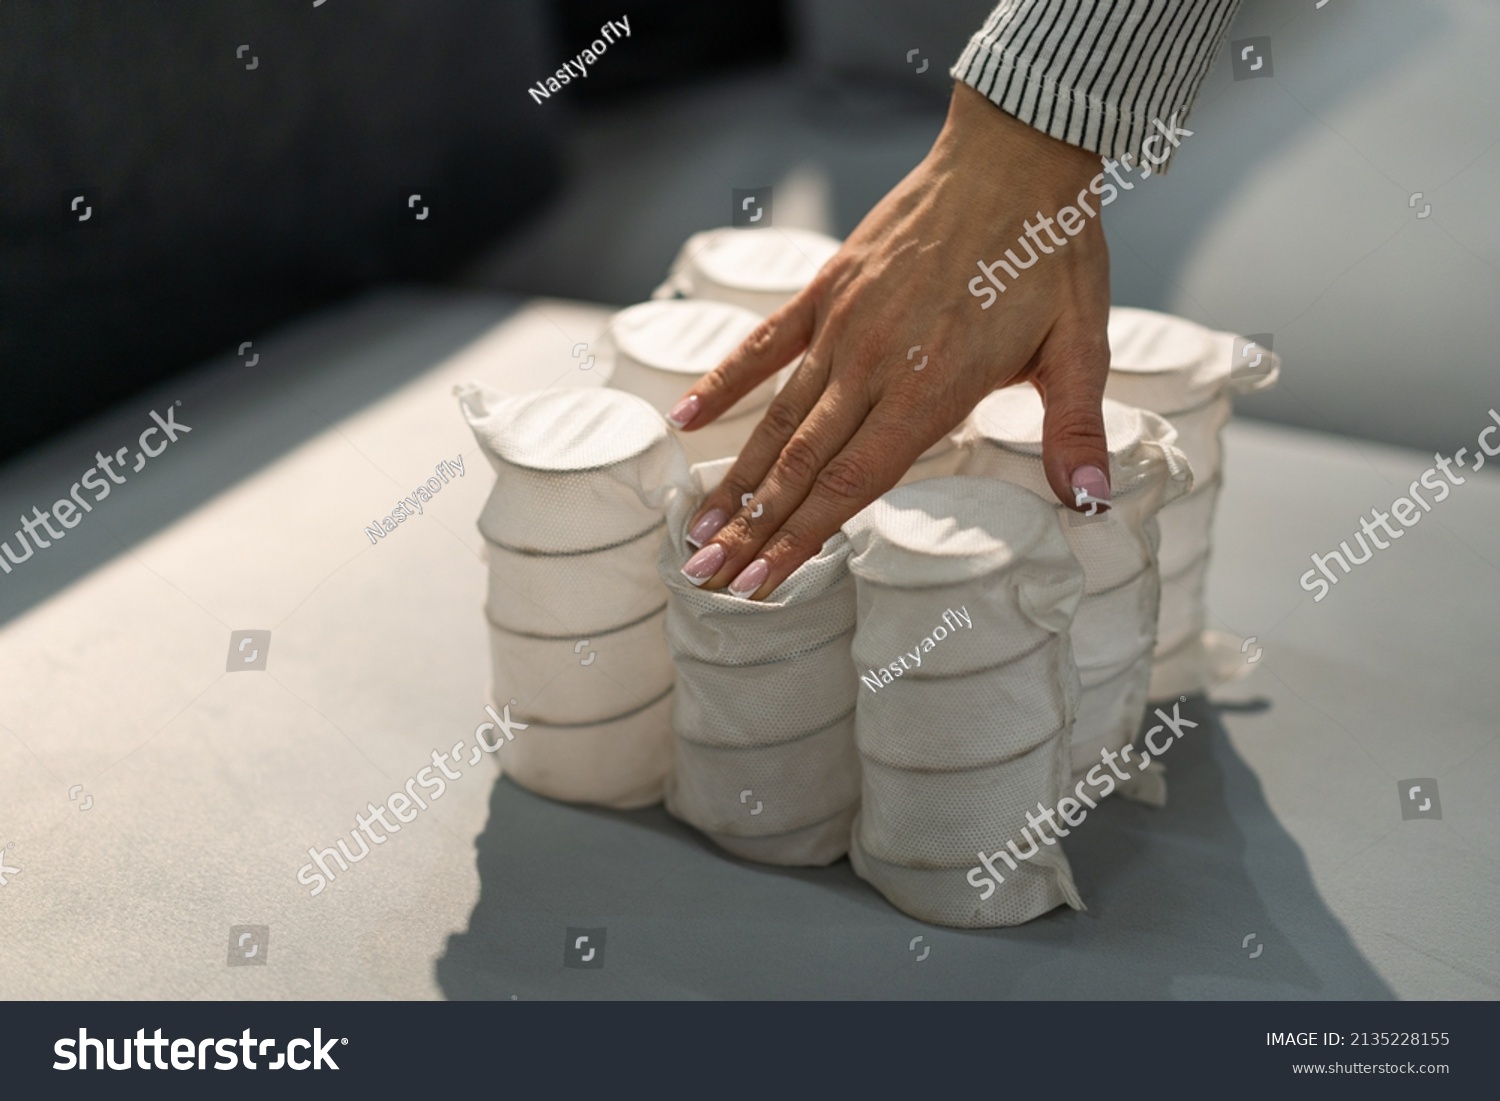 Independent spring blocks packed in spunbond. Bonding layers of springs. Furniture manufacture. Industrial and business concept. The concept of filling a mattress. #2135228155